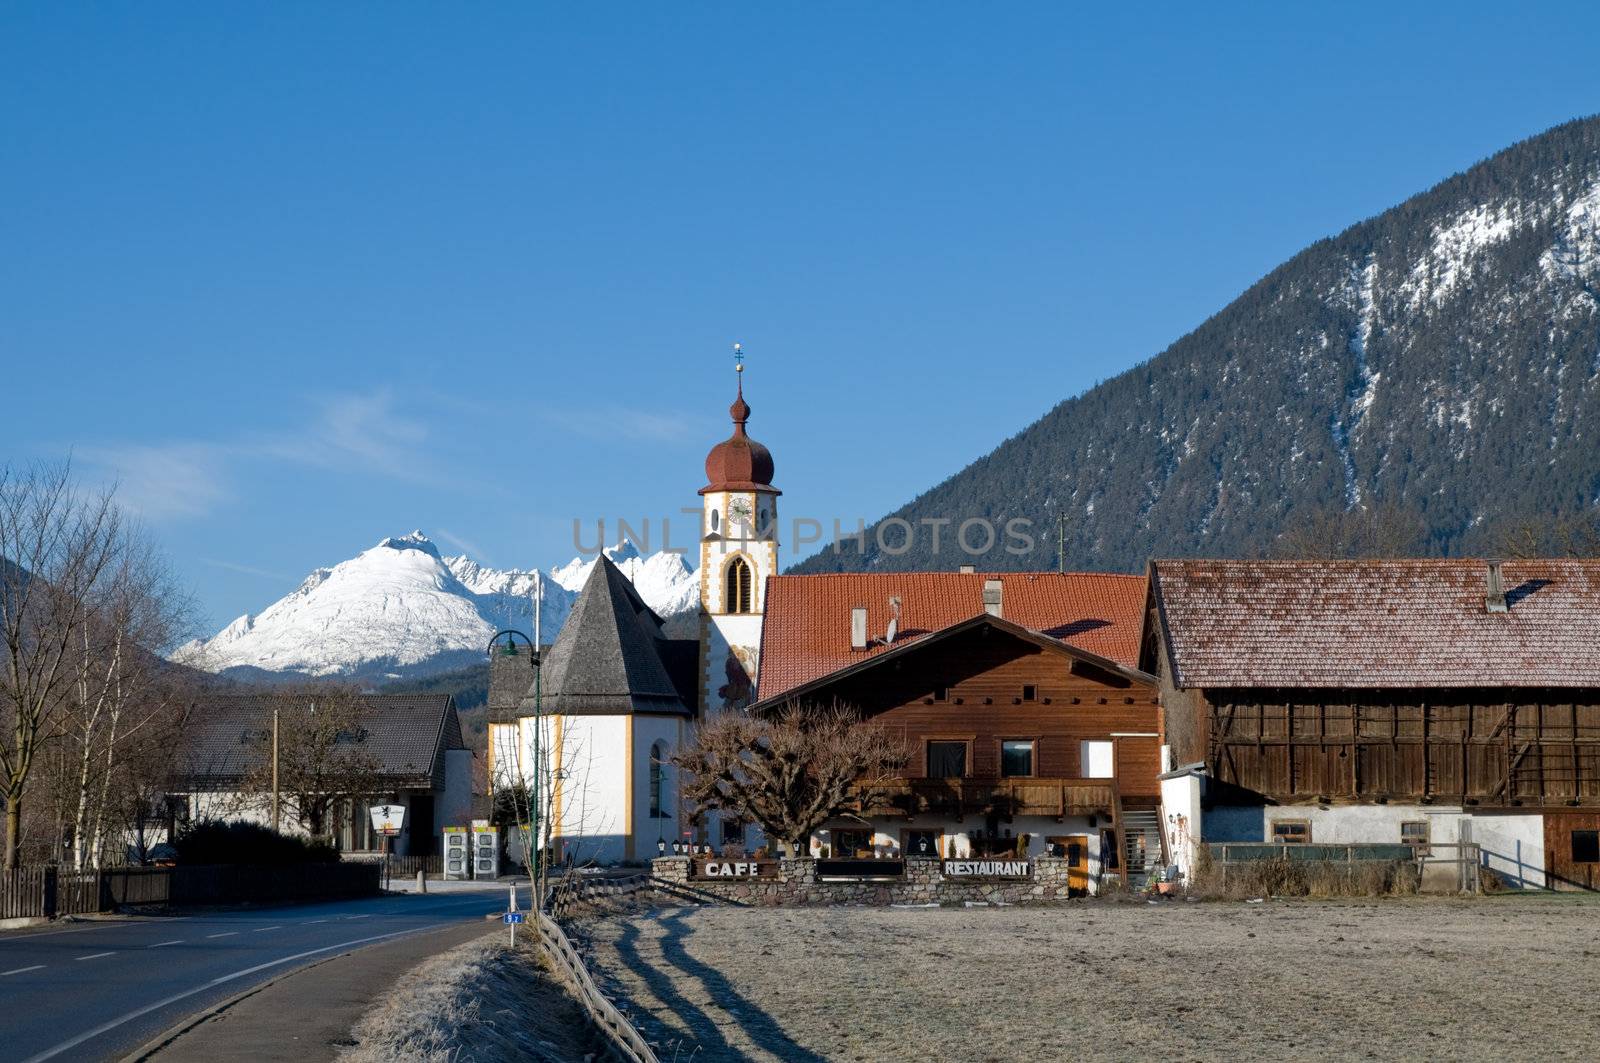 Mountain village in the Alps with church in the foreground